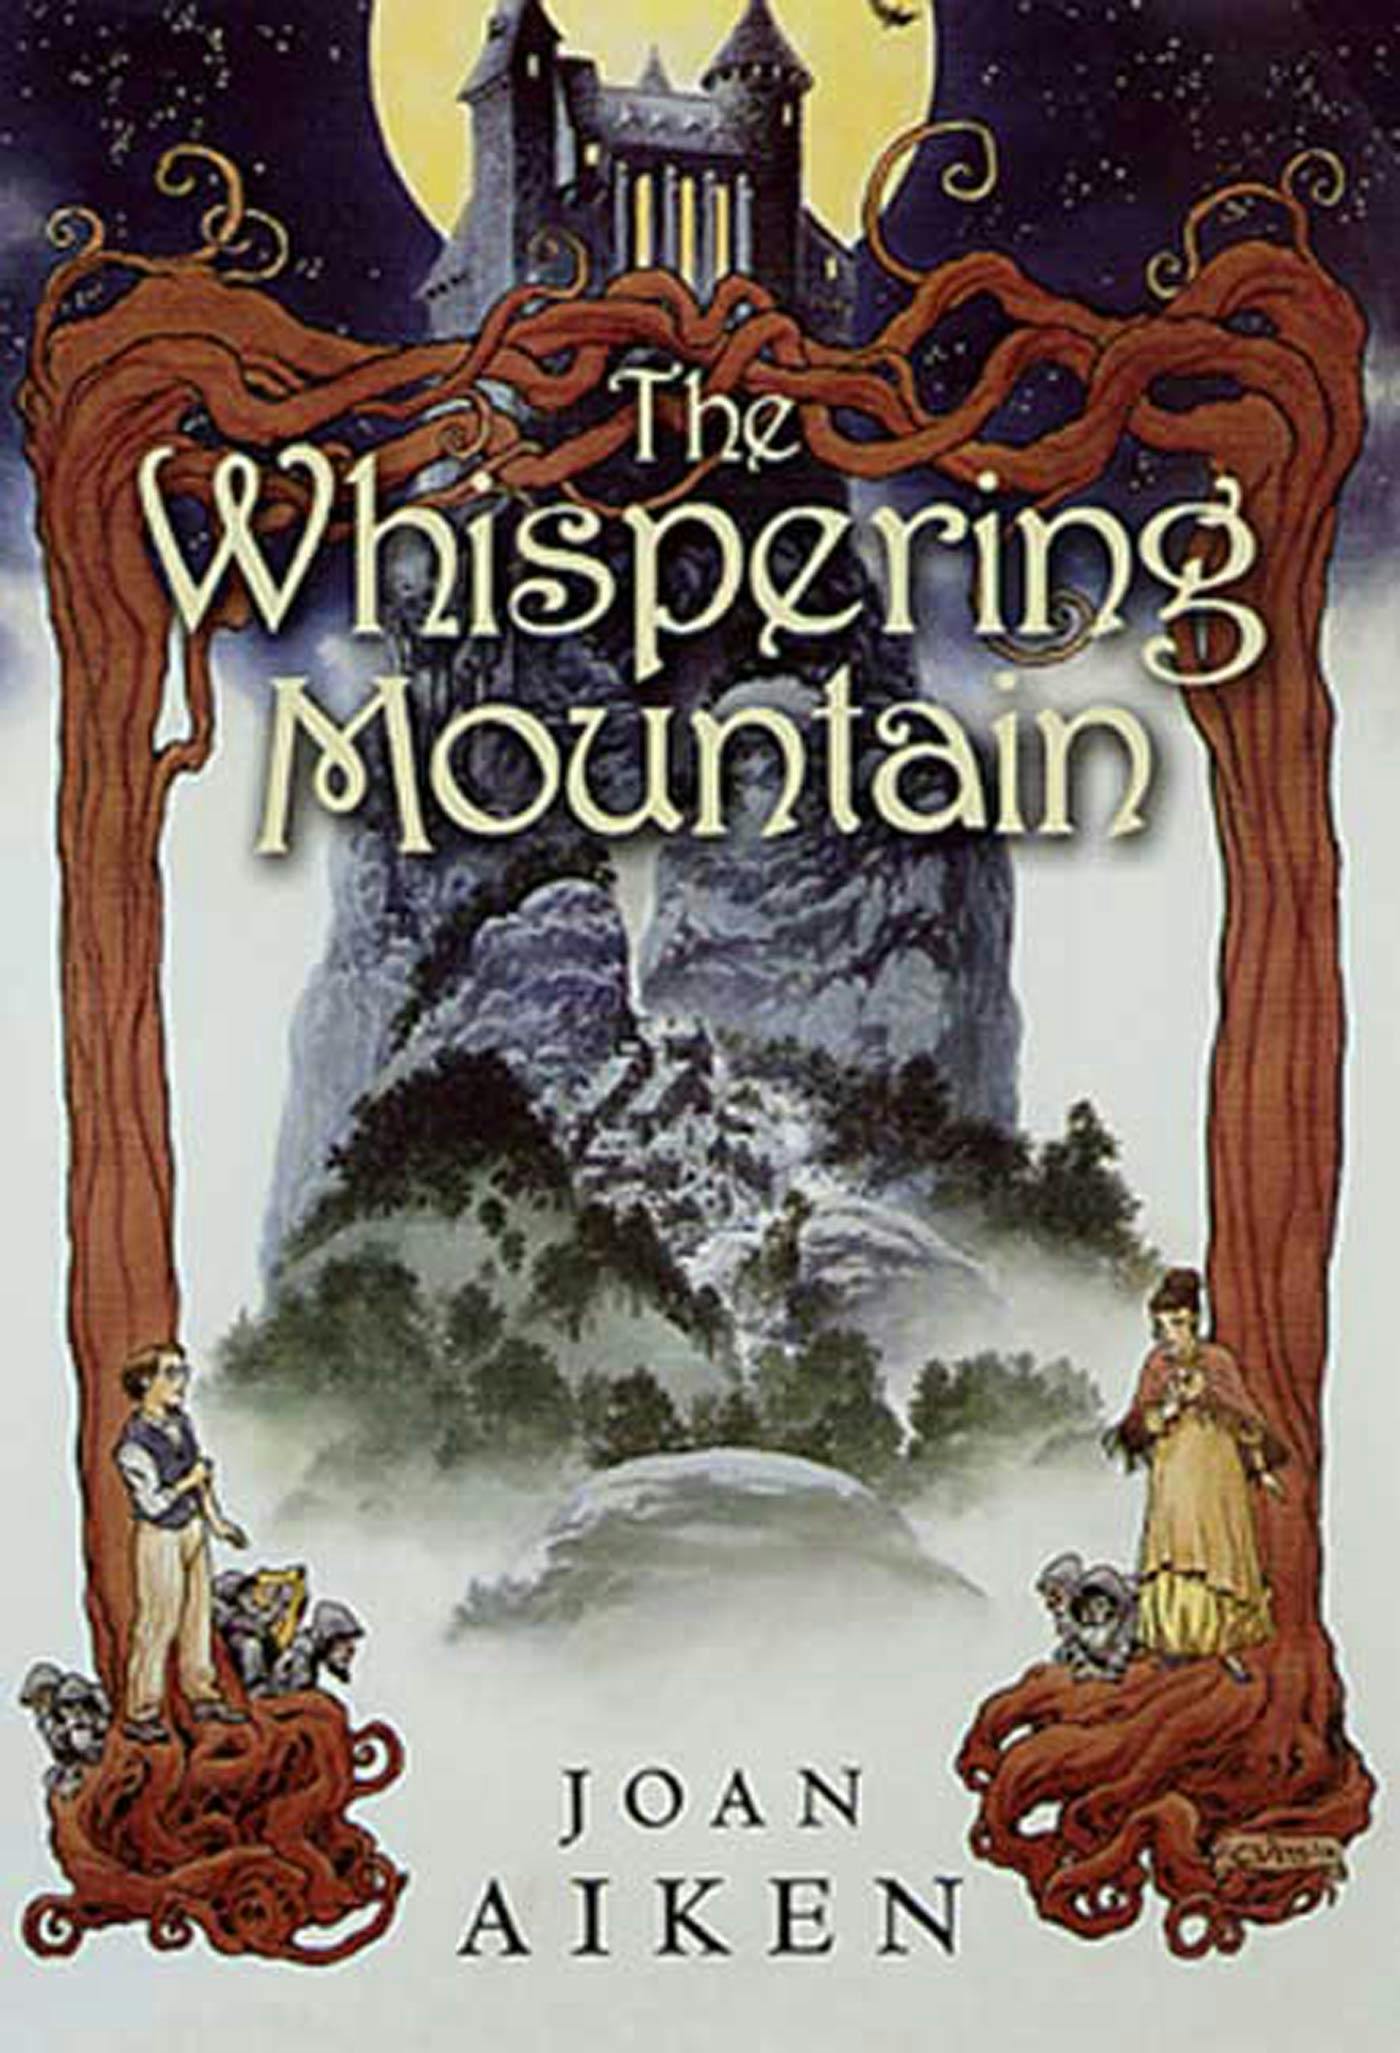 Cover for the book titled as: The Whispering Mountain